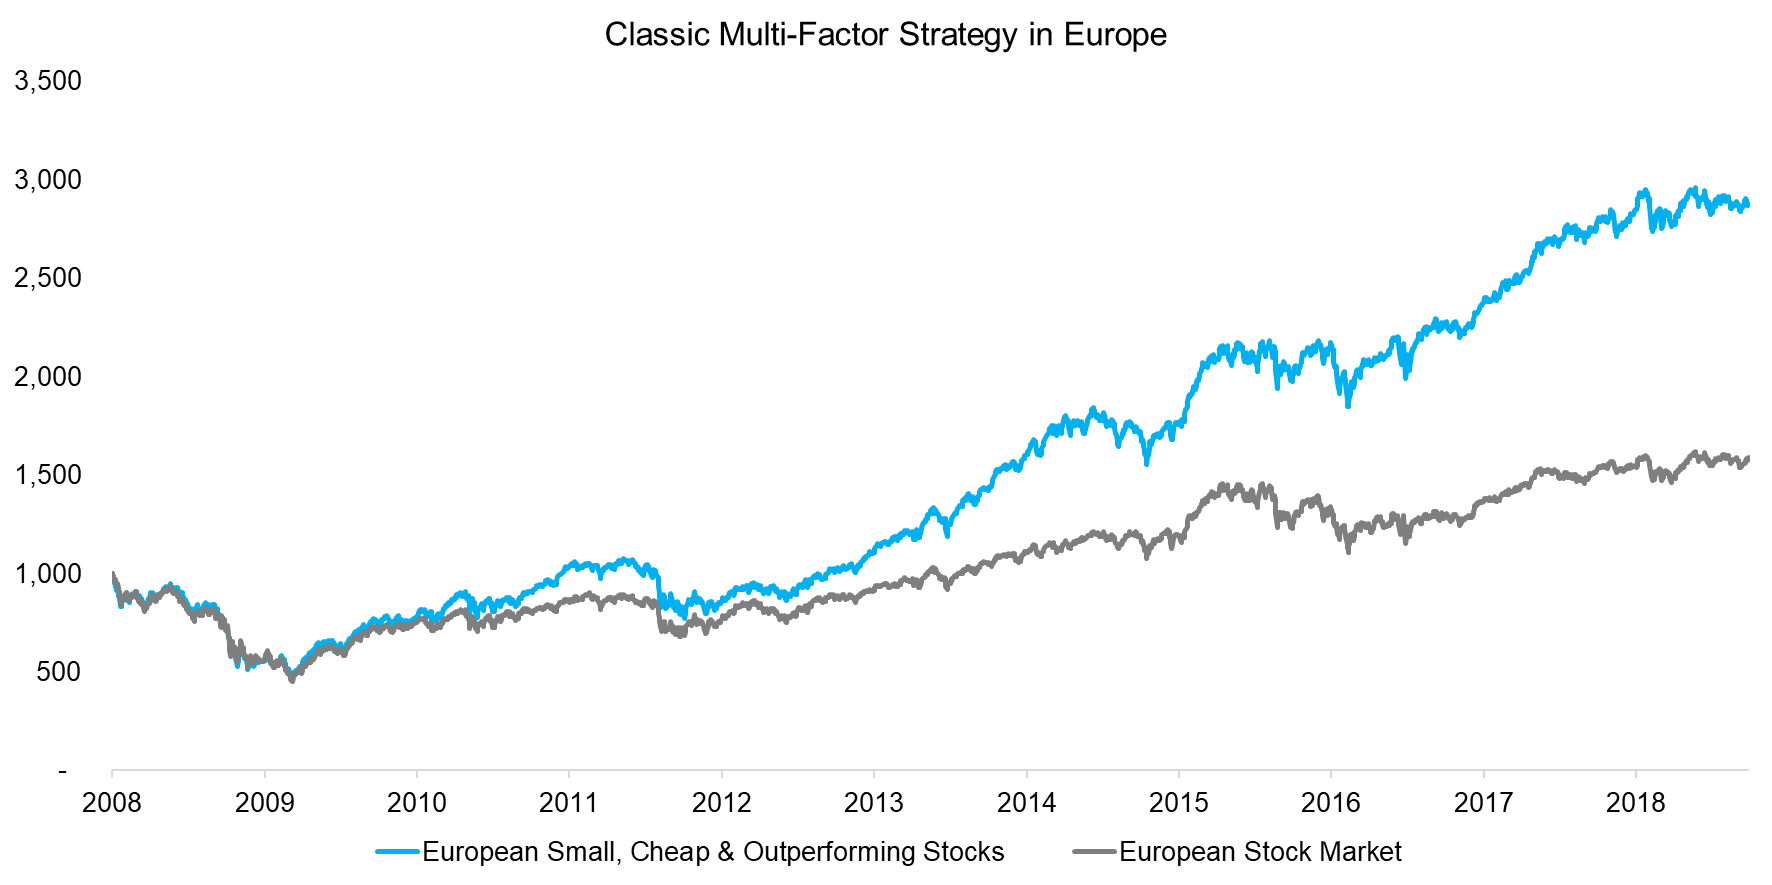 Classic Multi-Factor Strategy in Europe